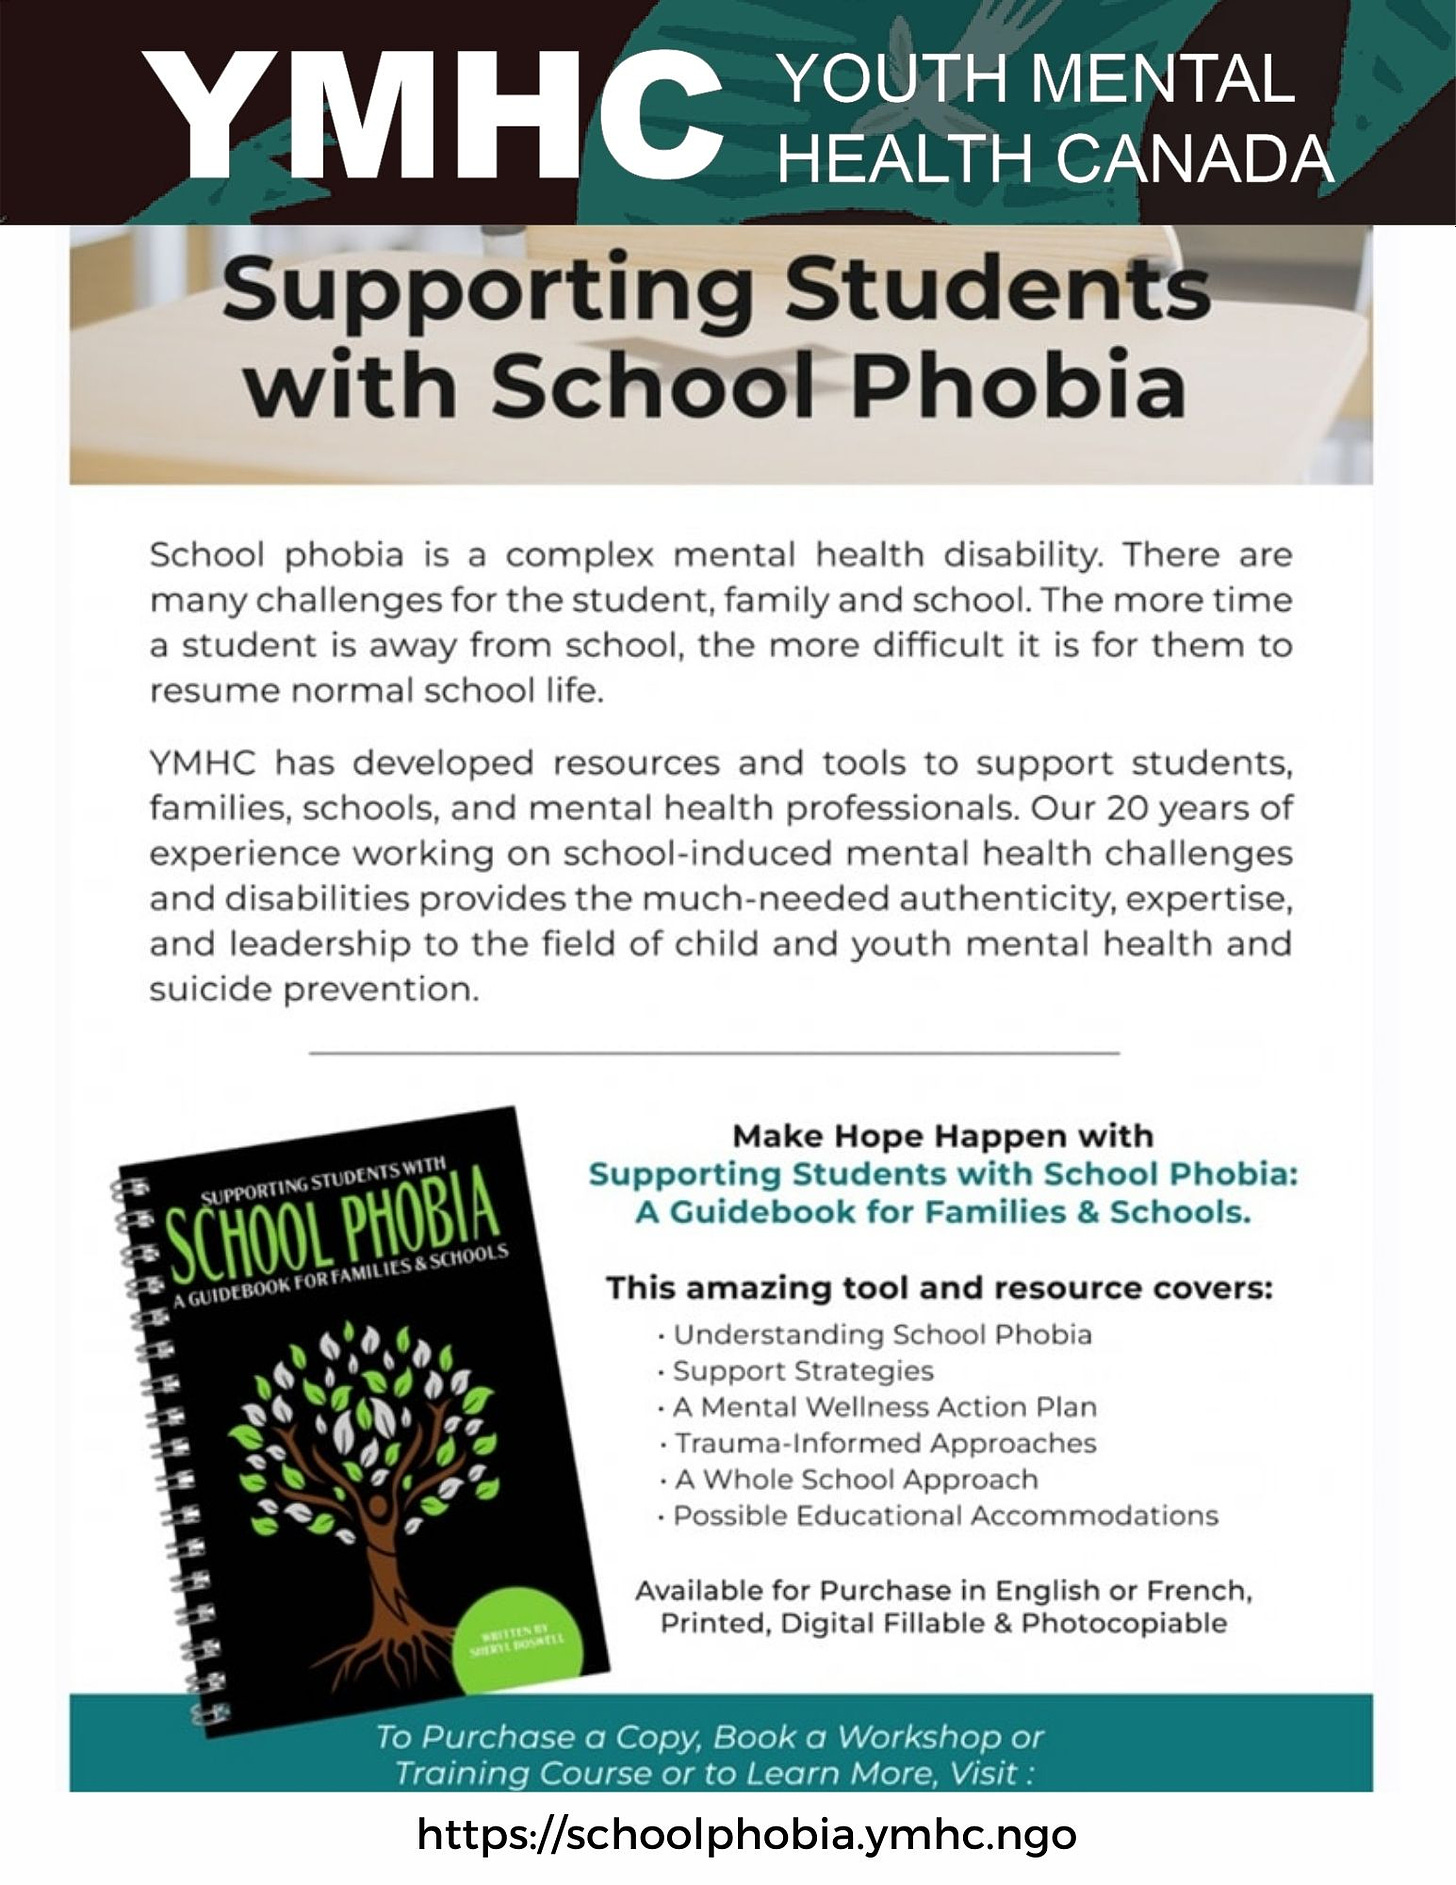 Supporting Students with School Phobia School phobia is a complex mental health disability that poses challenges for students, families, and schools. The more time a student stays away from school, the harder it becomes for them to resume normal school life. At YMHC, we have developed resources and tools to support students, families, schools, and mental health professionals. With 20 years of experience in addressing school-induced mental health challenges and disabilities, we provide the much-needed authenticity, expertise, and leadership in the field of child and youth mental health and suicide prevention. Make Hope Happen with our guidebook for families and schools, "Supporting Students with School Phobia." This amazing tool and resource cover various topics, including understanding school phobia, support strategies, a mental wellness action plan, trauma-informed approaches, and a whole-school approach. Available for purchase in English or French, printed, digital fillable, and photocopiable. To purchase a copy, book a workshop or training course, or learn more, visit https://schoolphobia.ymhc.ngo.